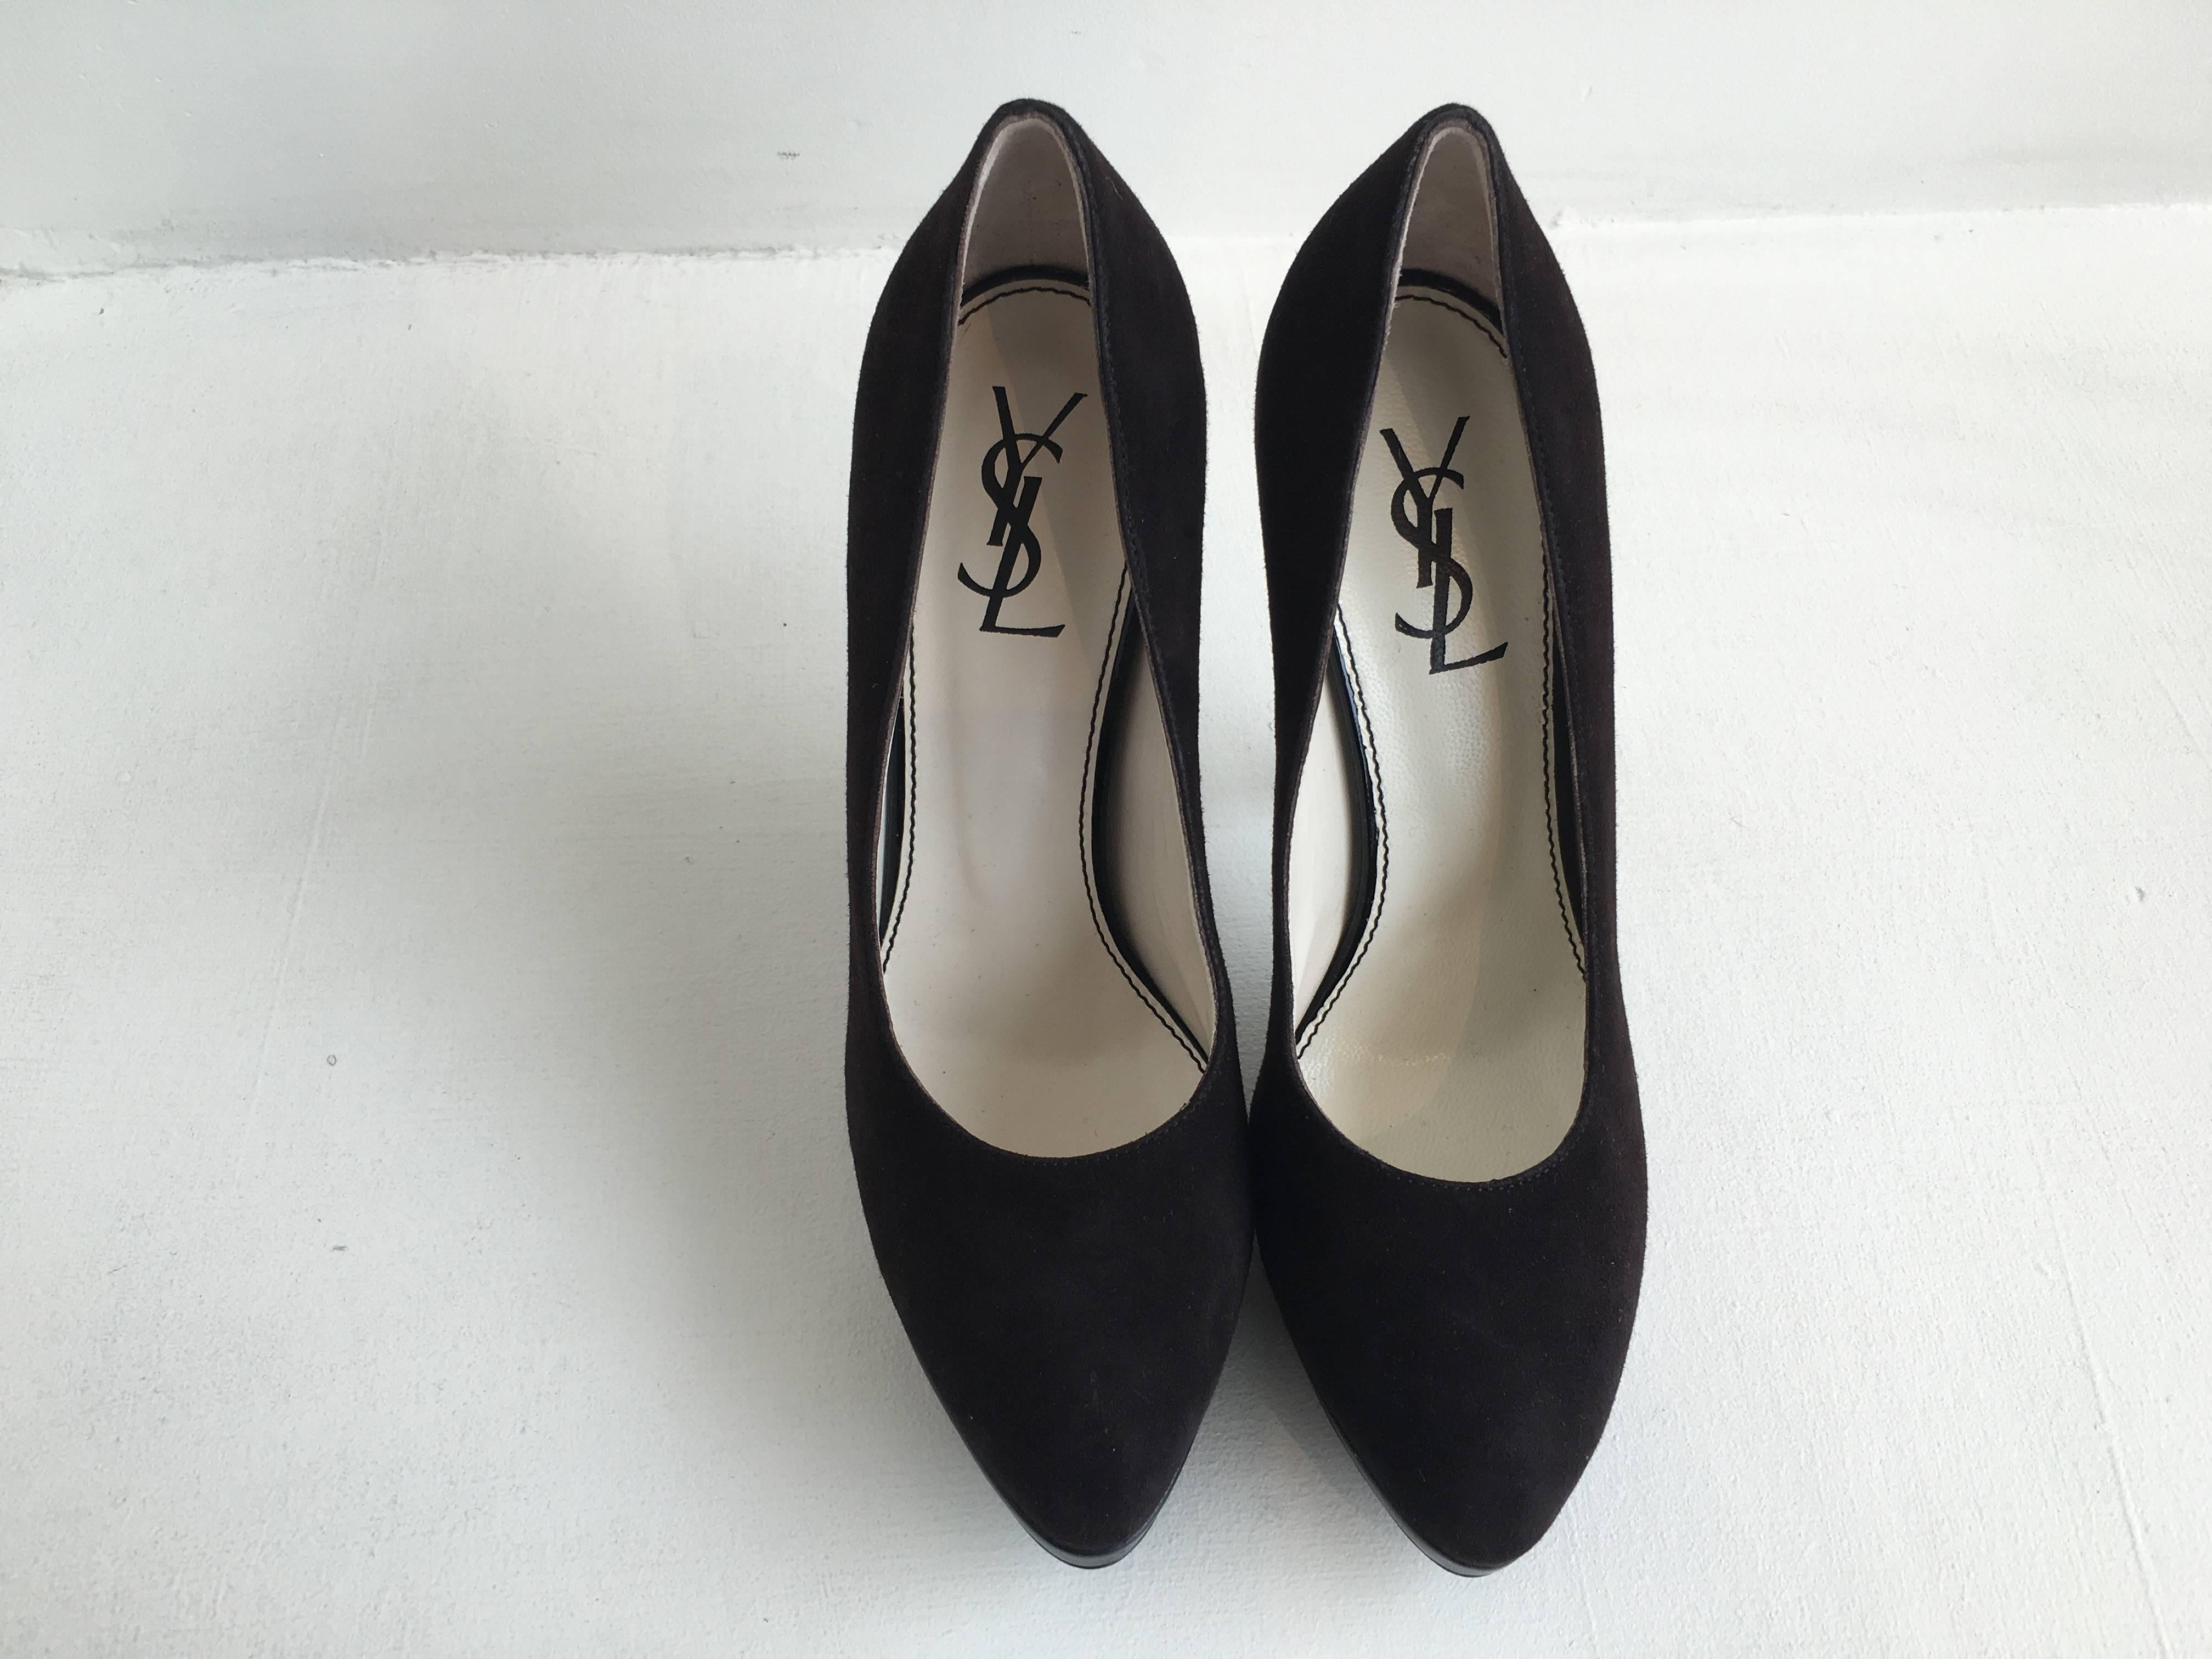 YSL brown suede shoe with 4.25 inch grey patent heel, 3/4 inch black leather platform and dark brown wood half wedge accent.